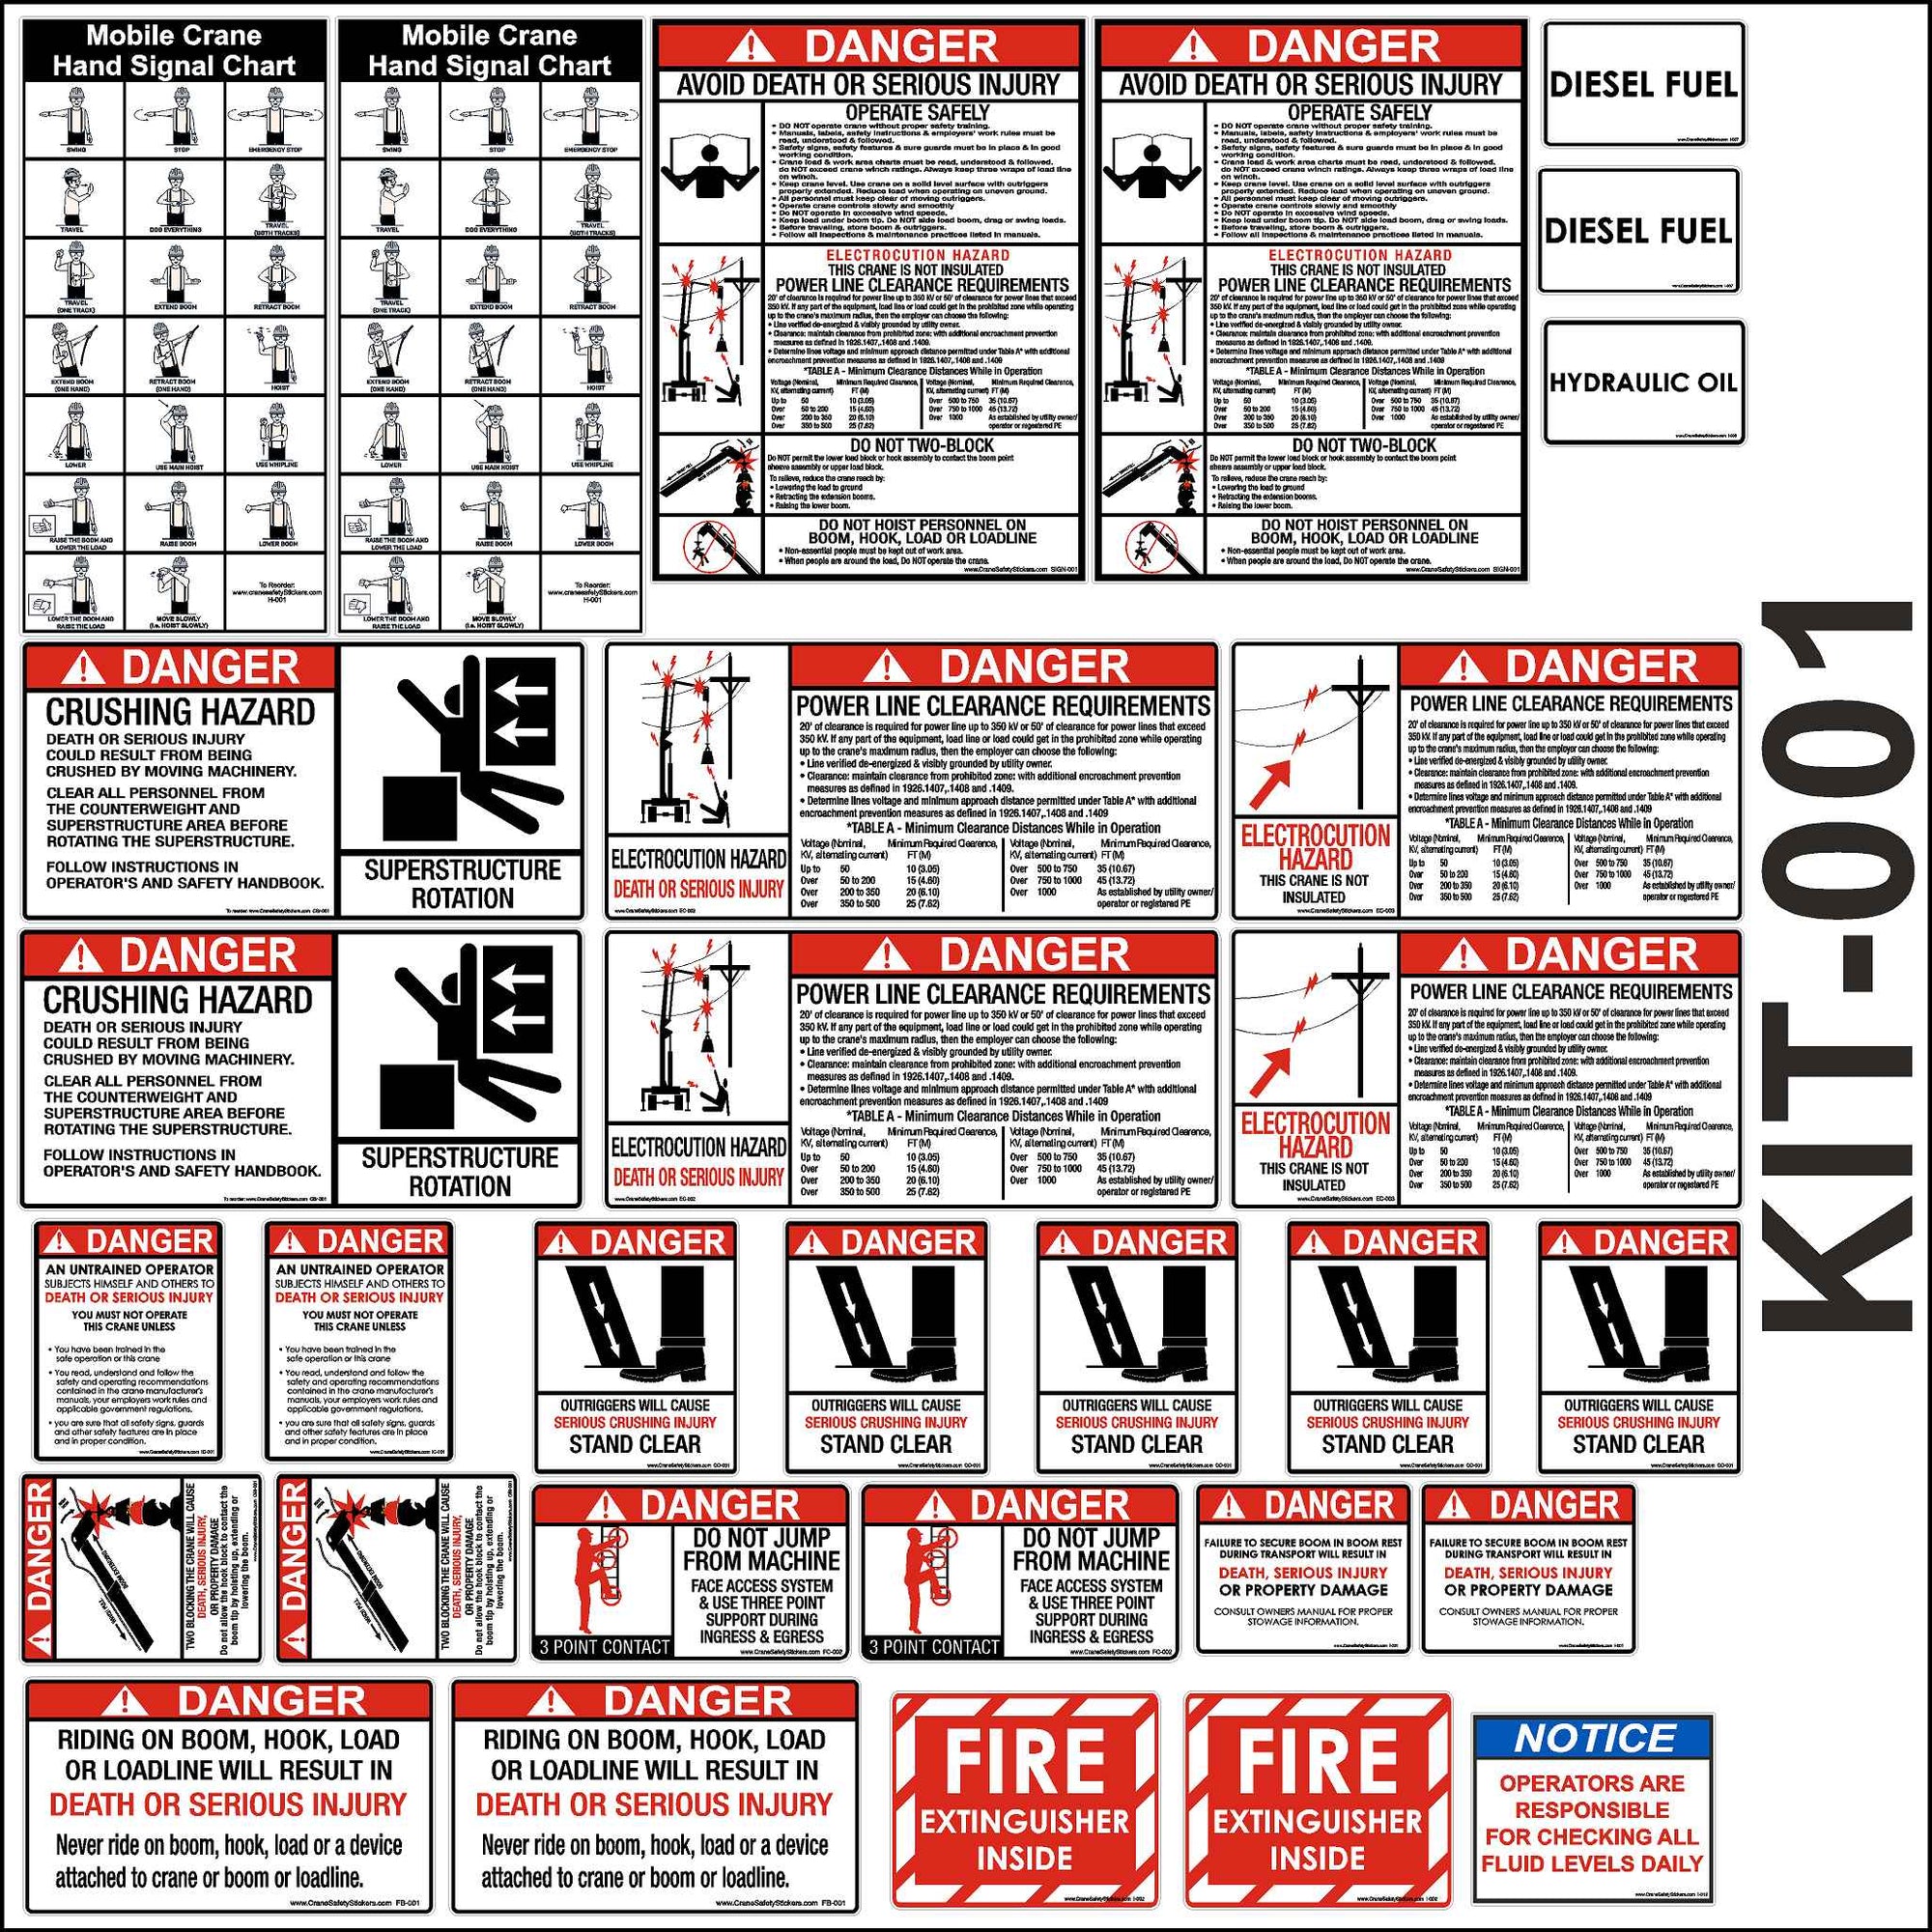 This Crane and Boom Truck Safety Sticker Kit contains all the boom truck safety stickers you need for most cranes to pass certification. Electrical Hazard, Crush Hazard, Fall Hazard, Inspection Decal, Diesel Fuel, Hydraulic Oil, Two Block, Three-Point Egress, Power Line Clarence, Hand Signal Charts, Untrained Operator, and more.